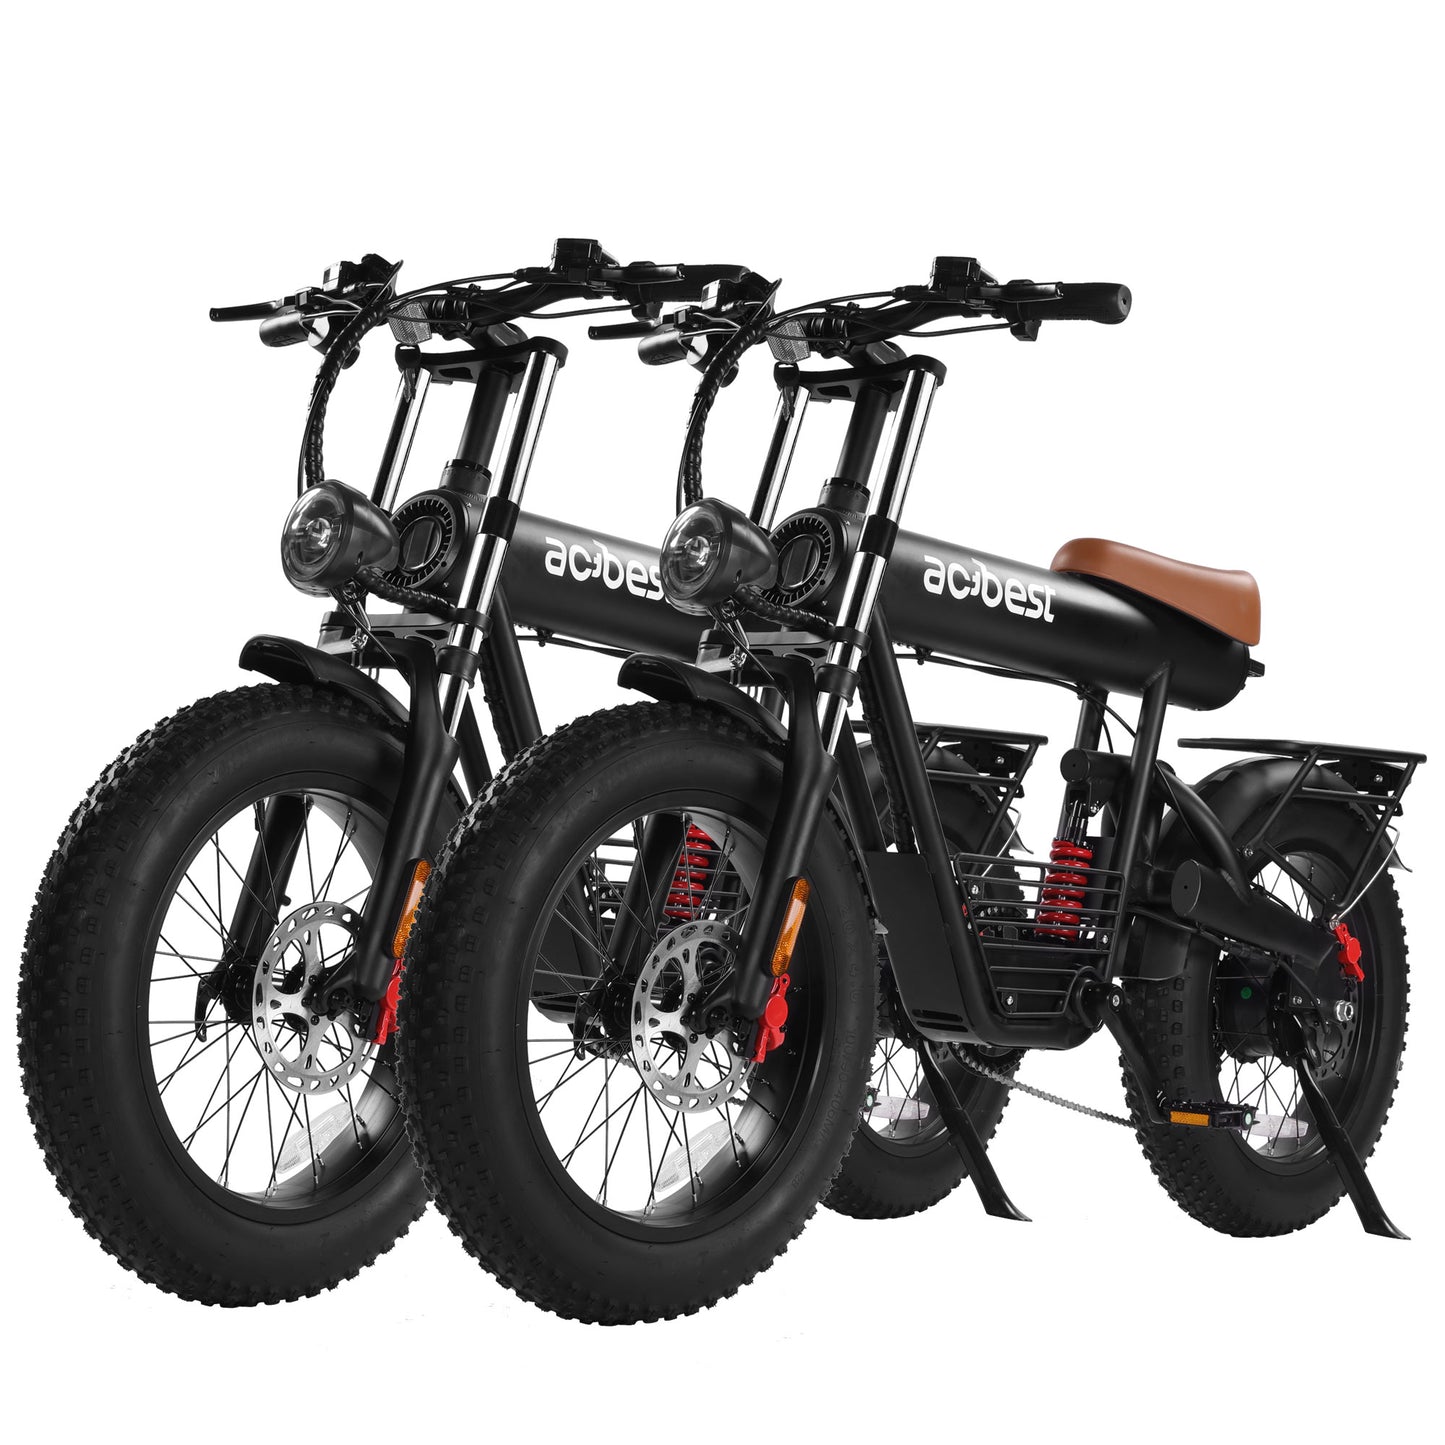 Pioneer Moped-Style Electric Bike